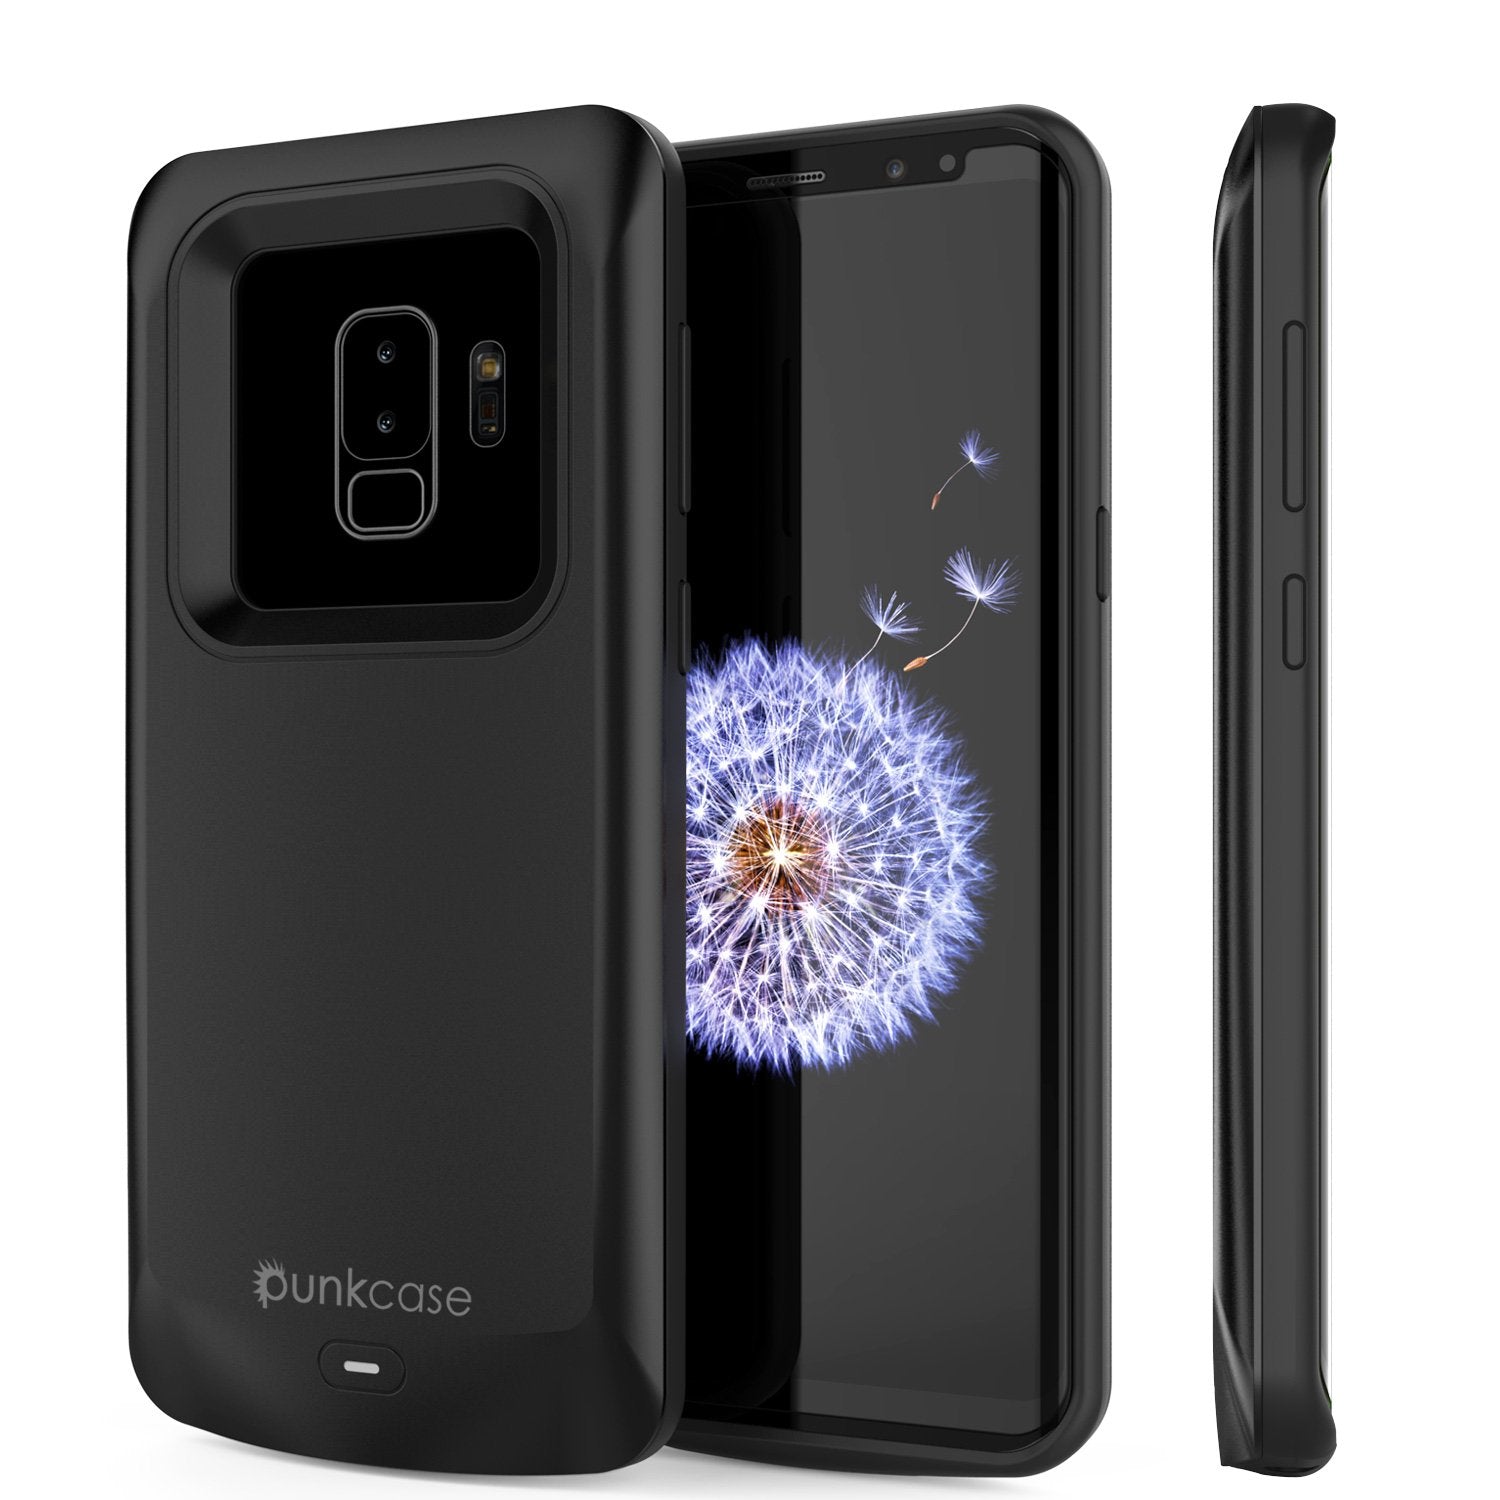 Galaxy S9 PLUS Battery Case, PunkJuice 5000mAH Fast Charging Power Bank W/ Screen Protector | Integrated USB Port | IntelSwitch | Slim, Secure and Reliable | Suitable for Samsung Galaxy S9+ [Black]